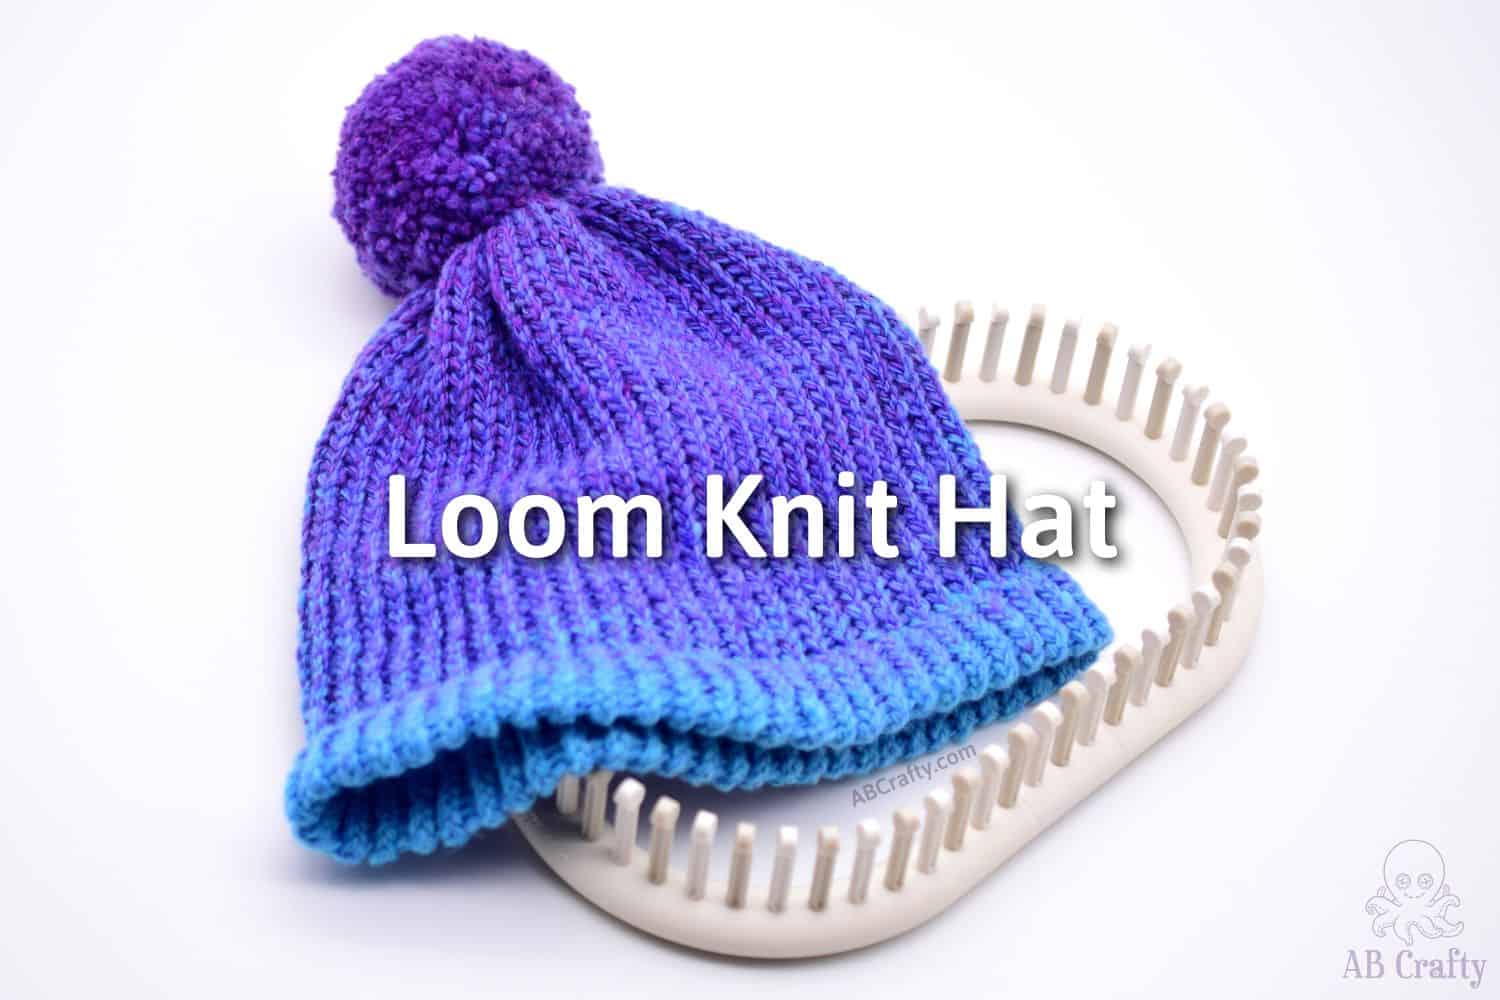 Loom Size , Hat Size and Number of Rows